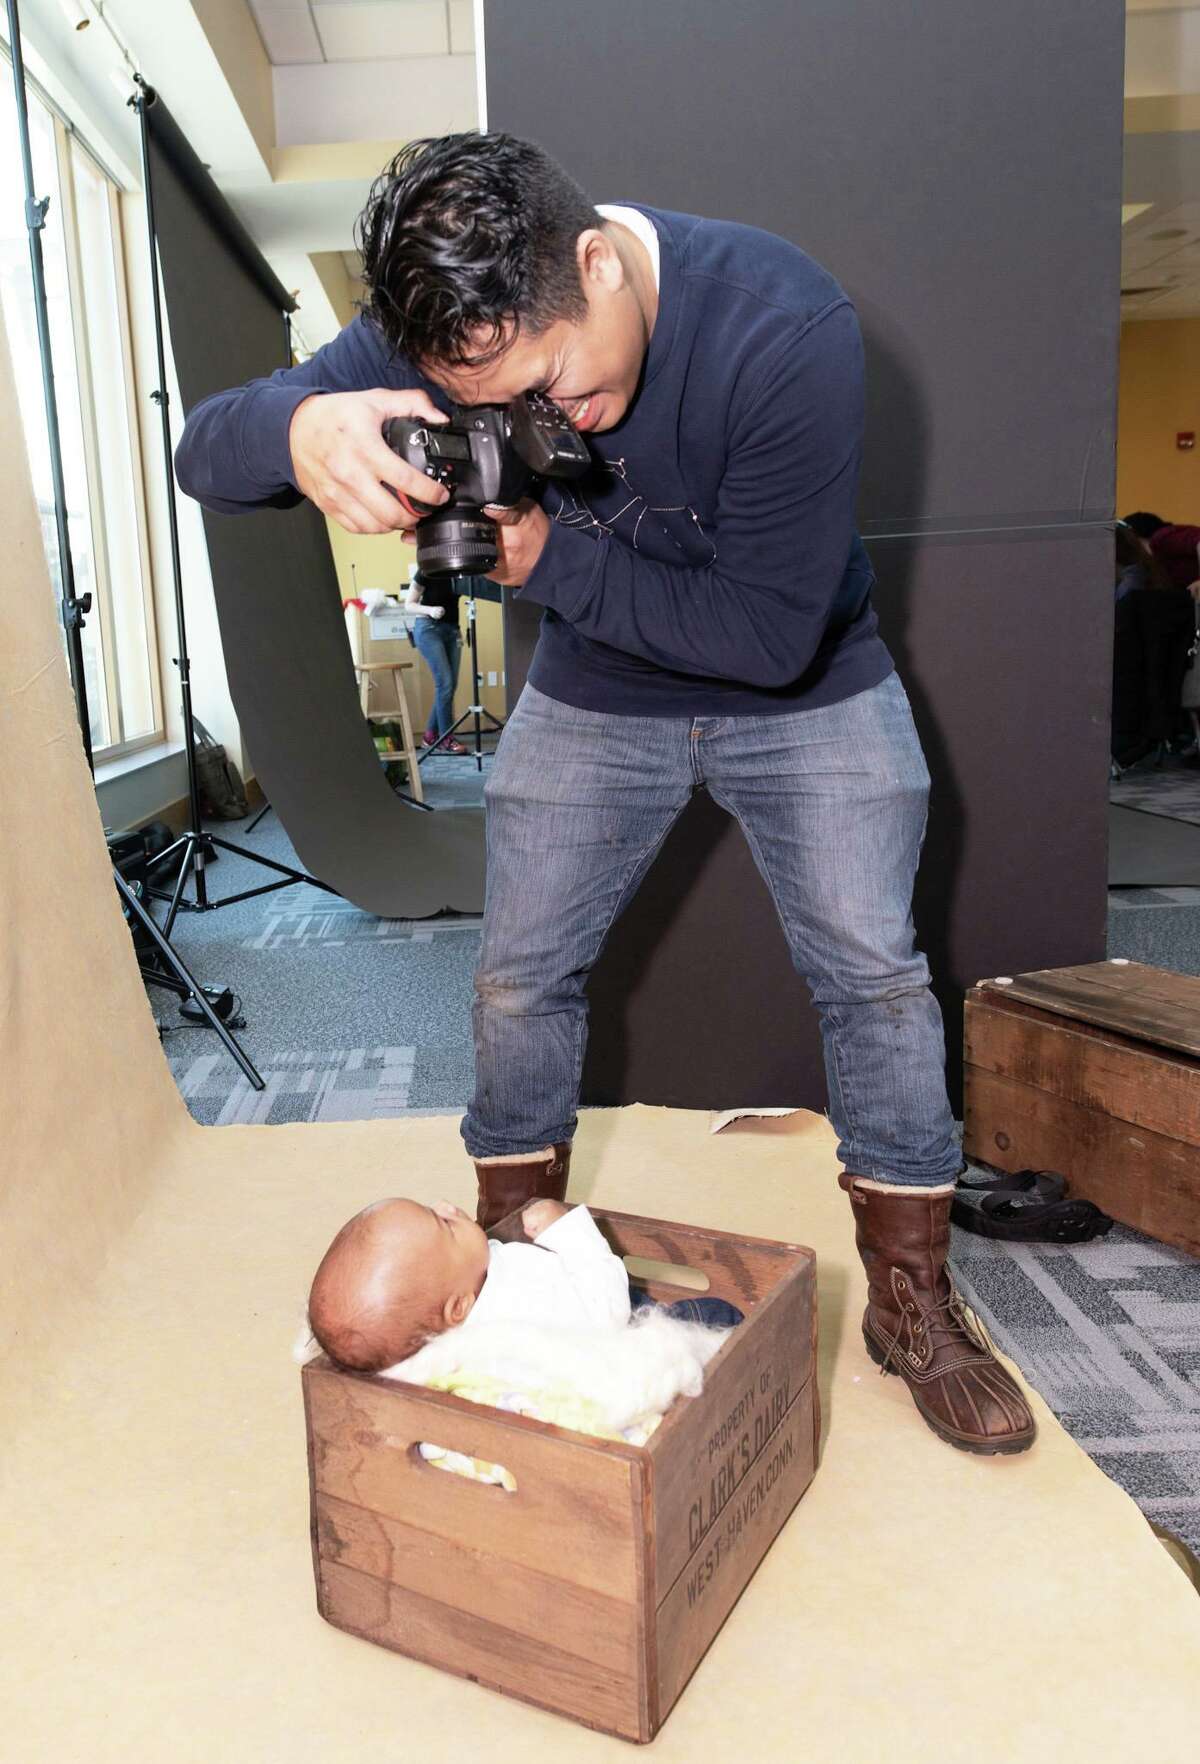 The Community Health Center of Middletown hosted its annual Help-Portrait event at the clinic, 675 Main St., Saturday. Here, an infant gets a portrait taken in an inventive way.